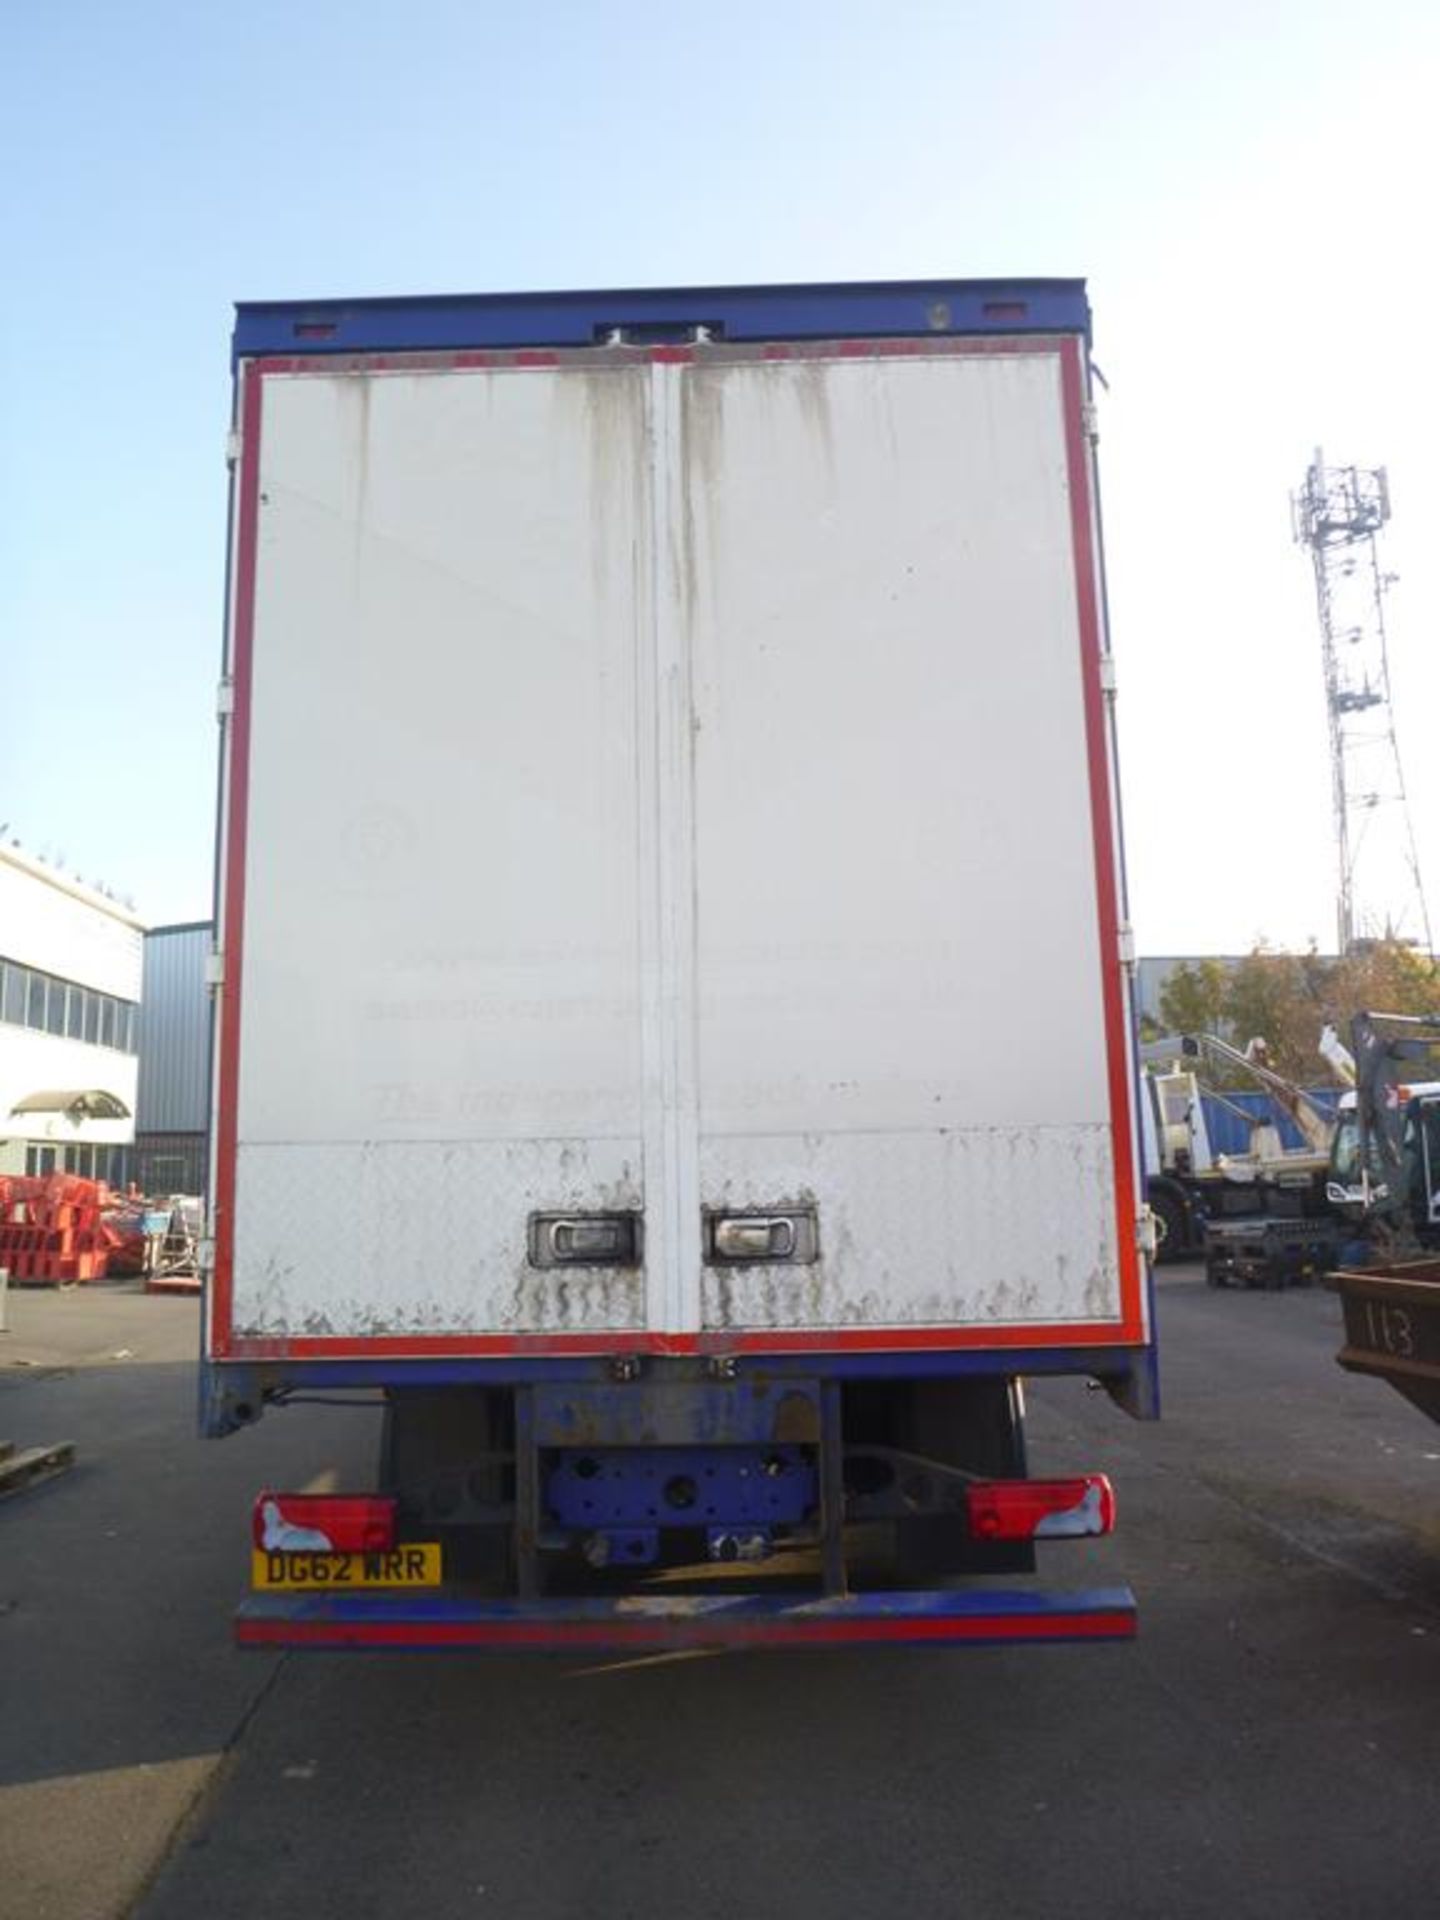 MAN TGS 26-320 6 x 2 BL Curtainside Truck - Image 7 of 22